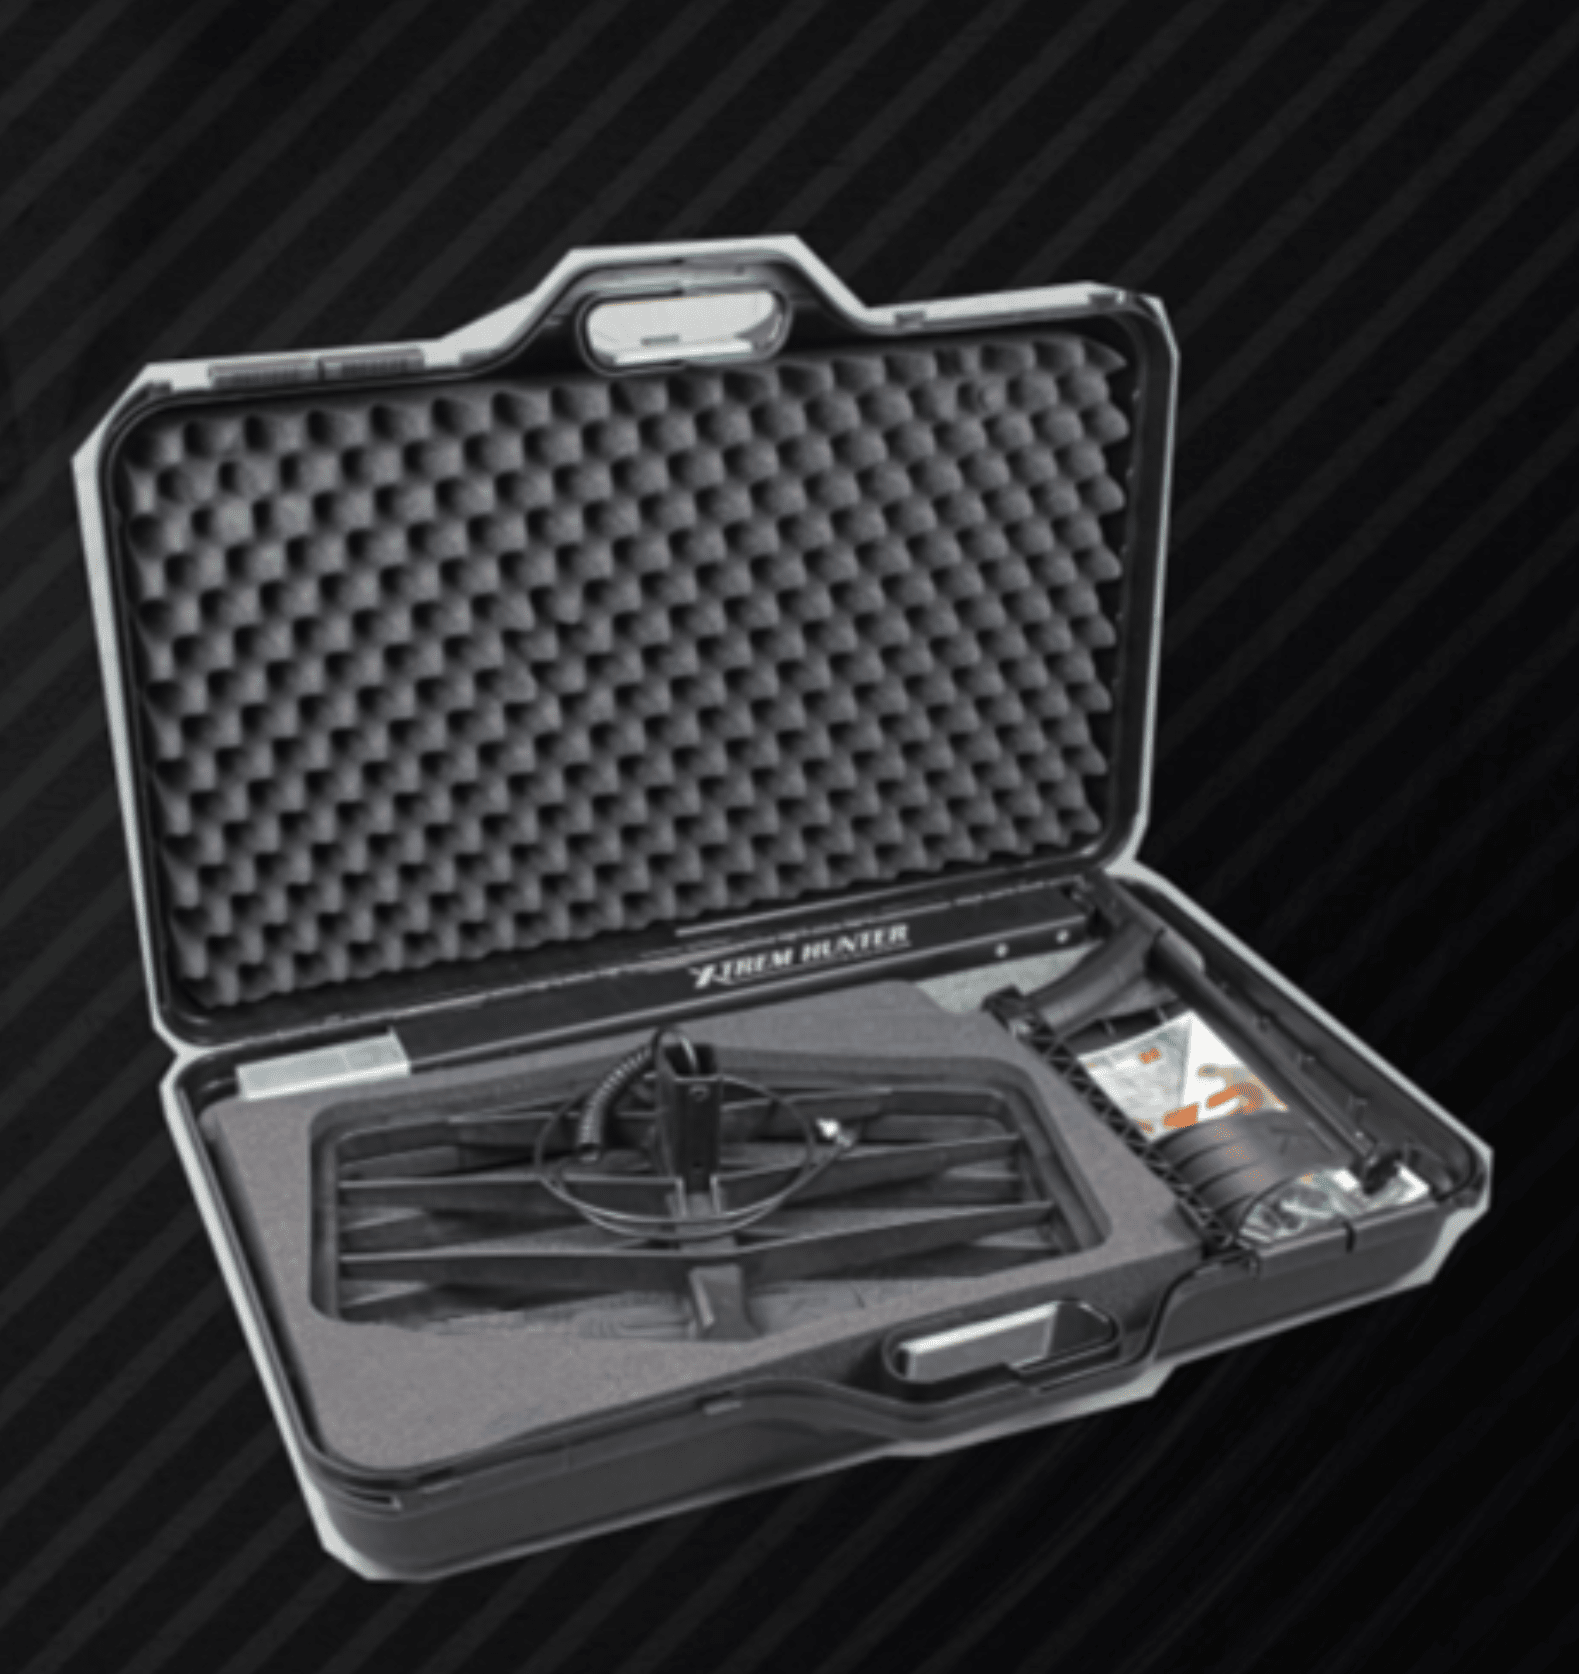 XP DEUS II XTREM HUNTER Coil Bundle - Coil, Case, Stem, Accessories ONLY, RC and Headphones Sold Separately